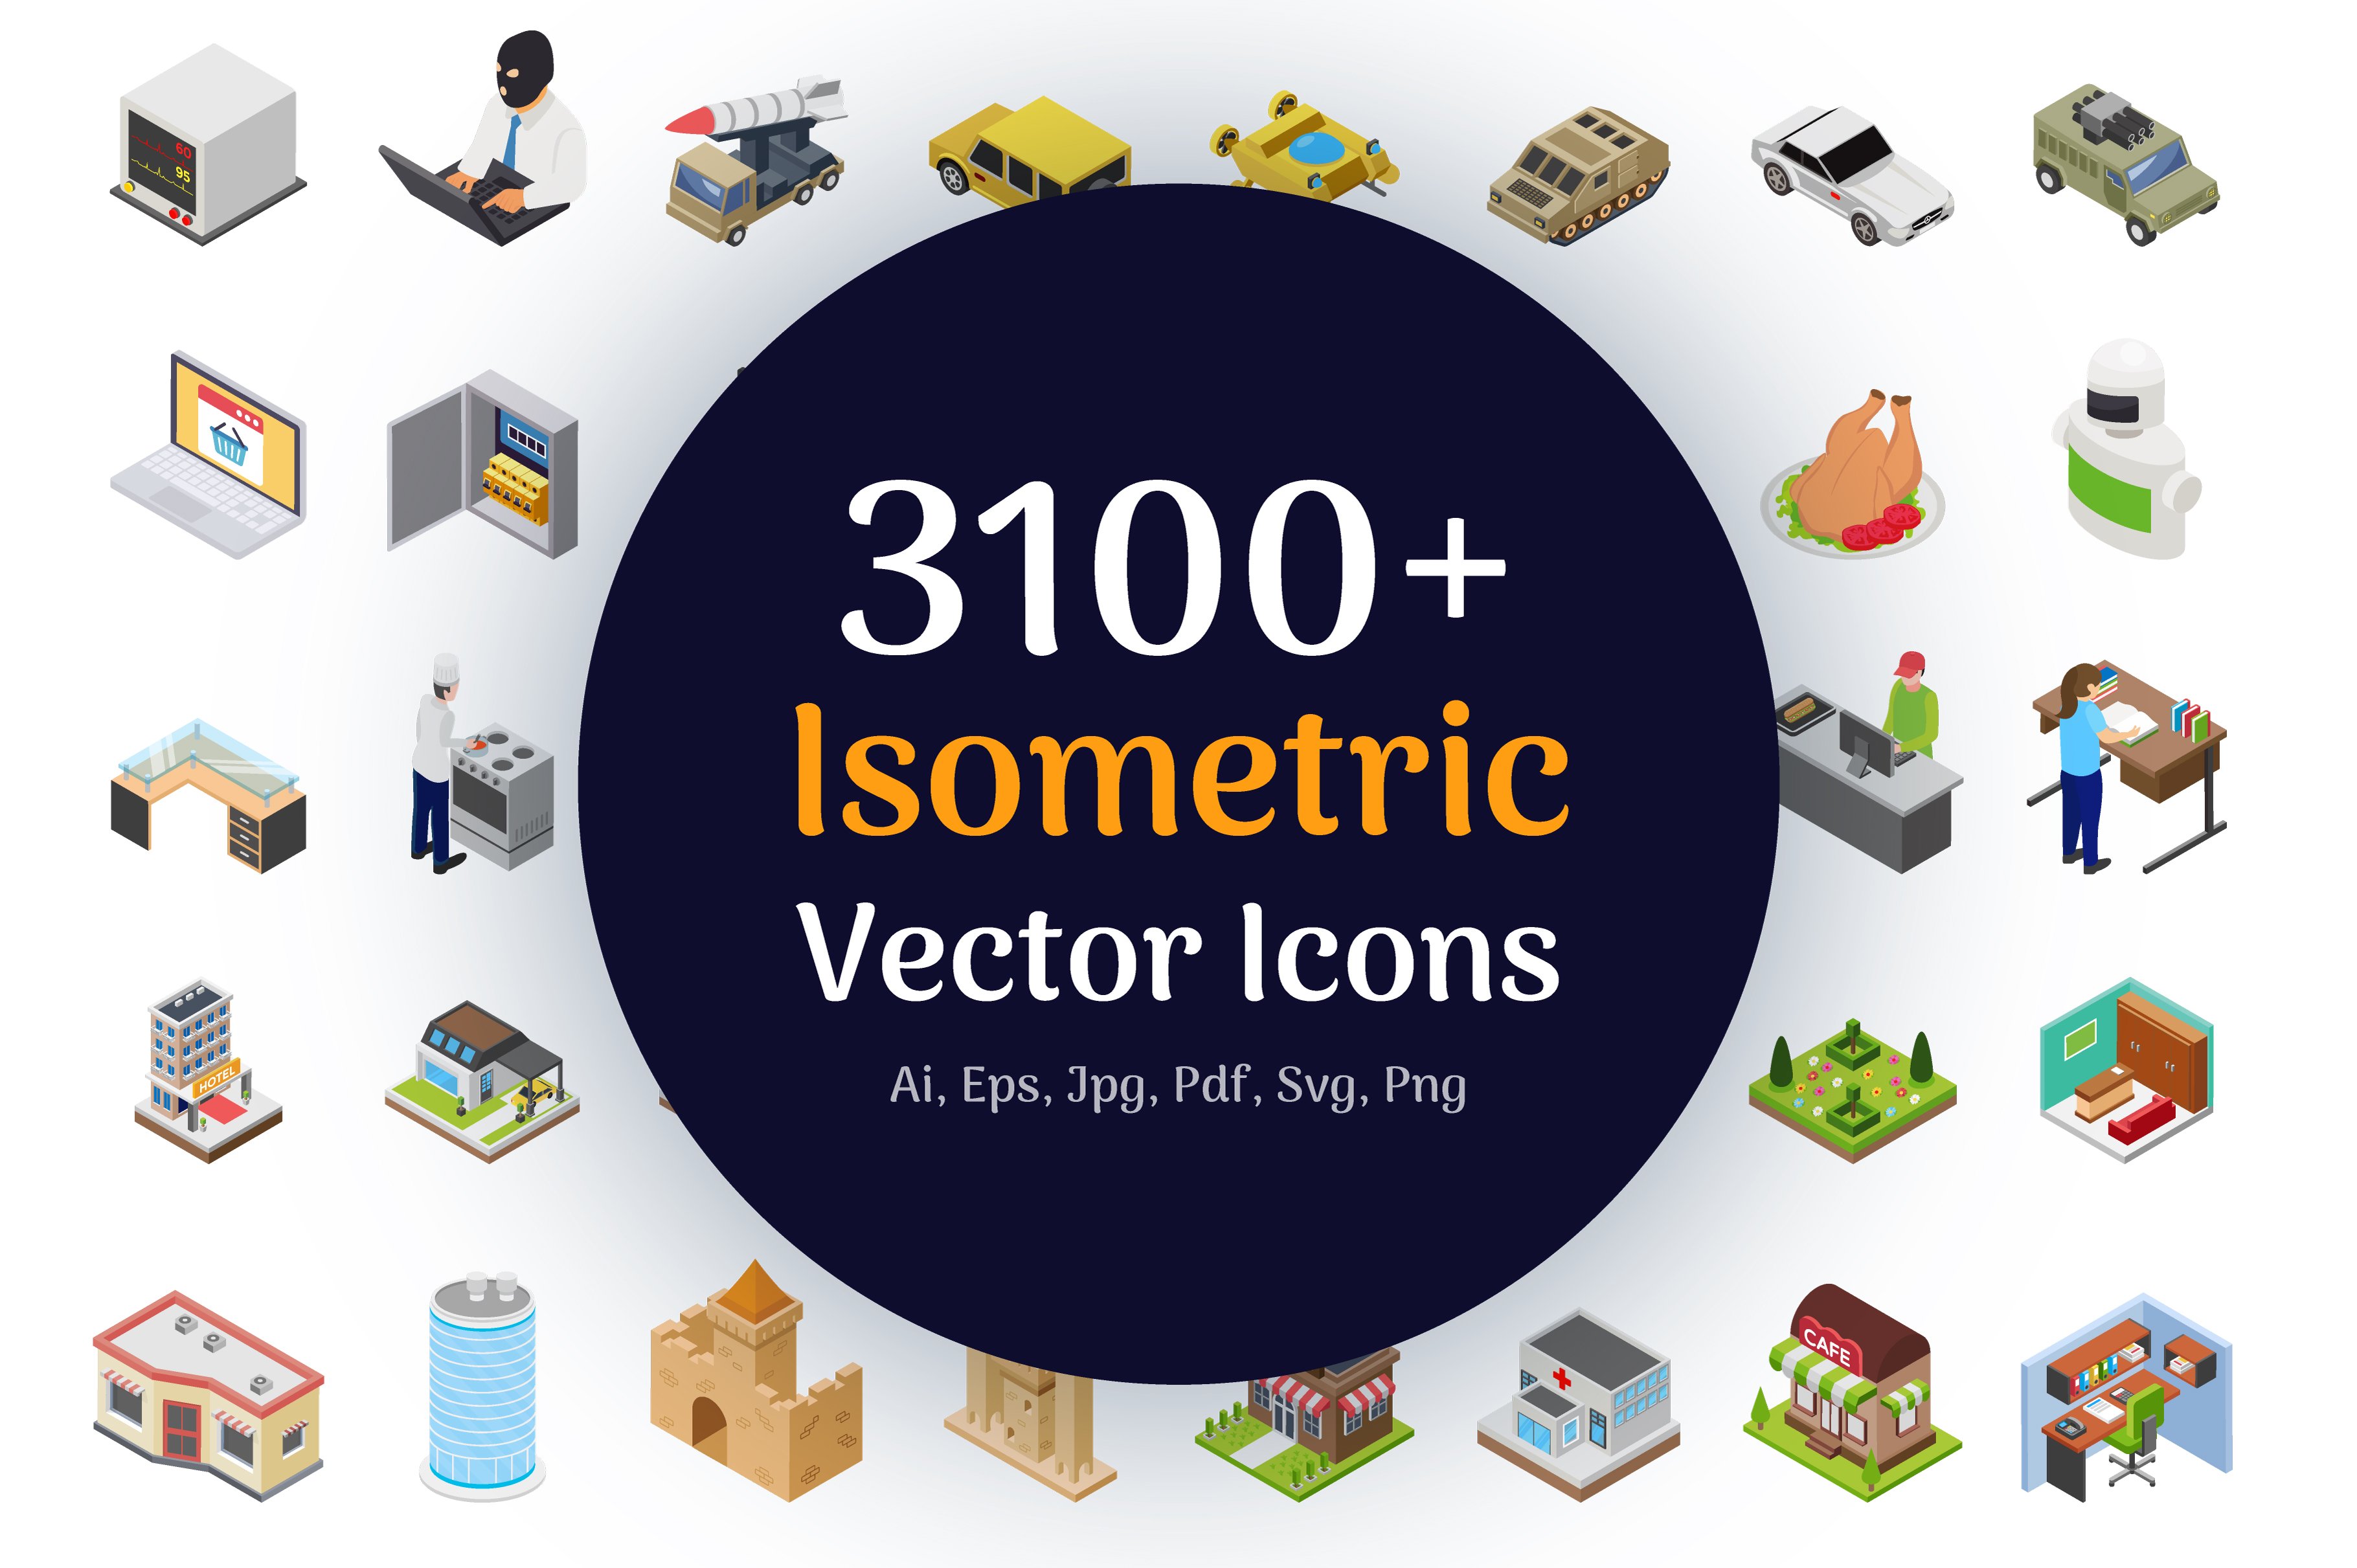 3100+ Isometric Vector Icons cover image.